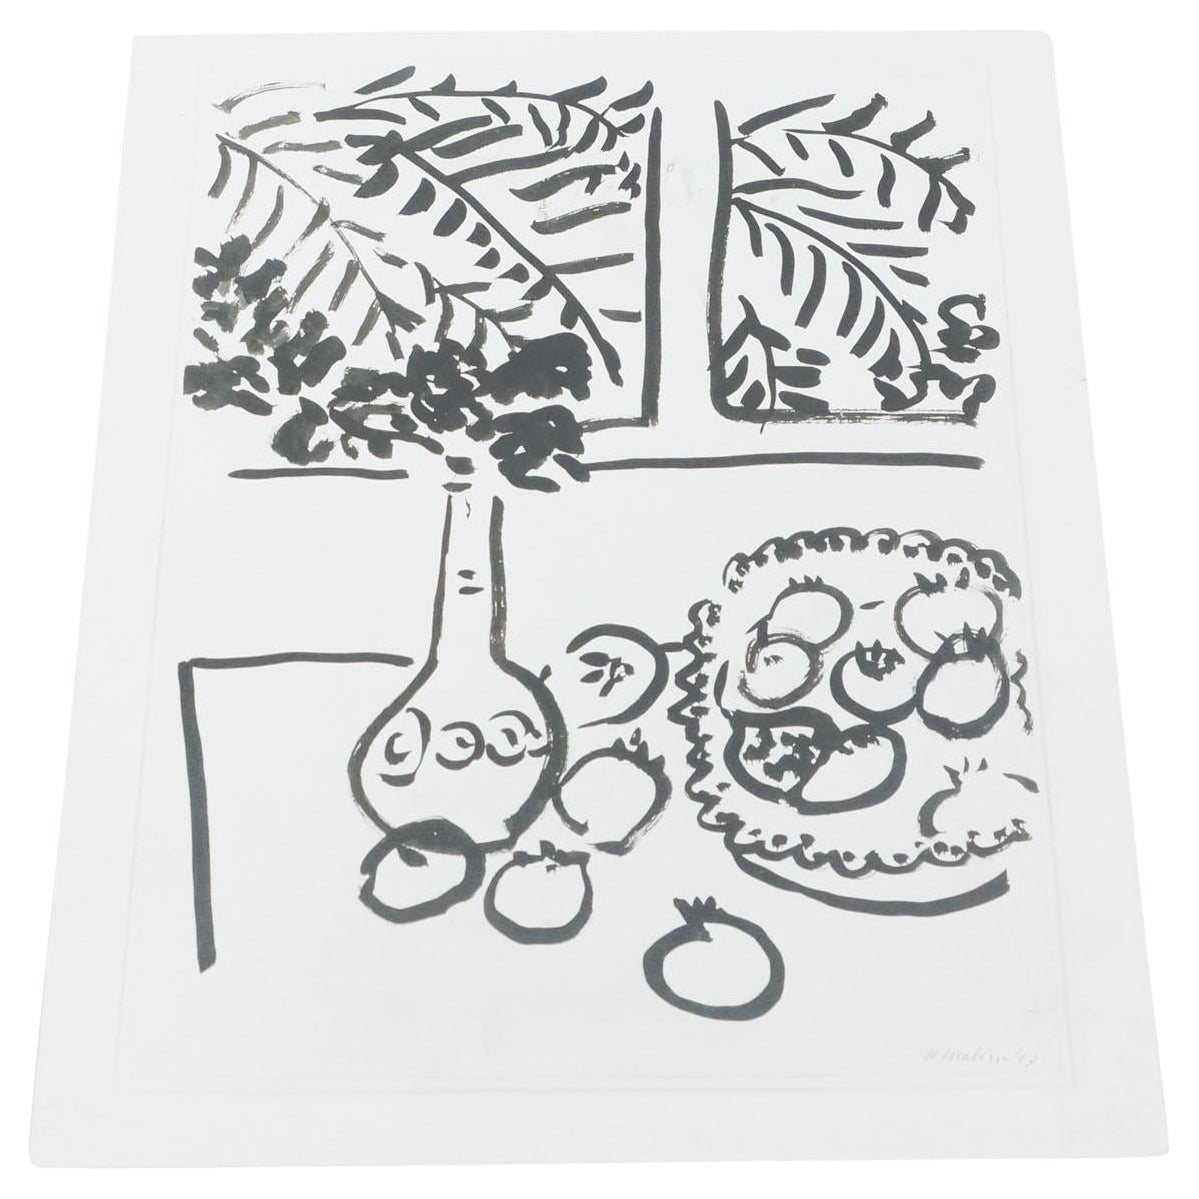 Archive Photography of Henri Matisse 'Still Life', 1954